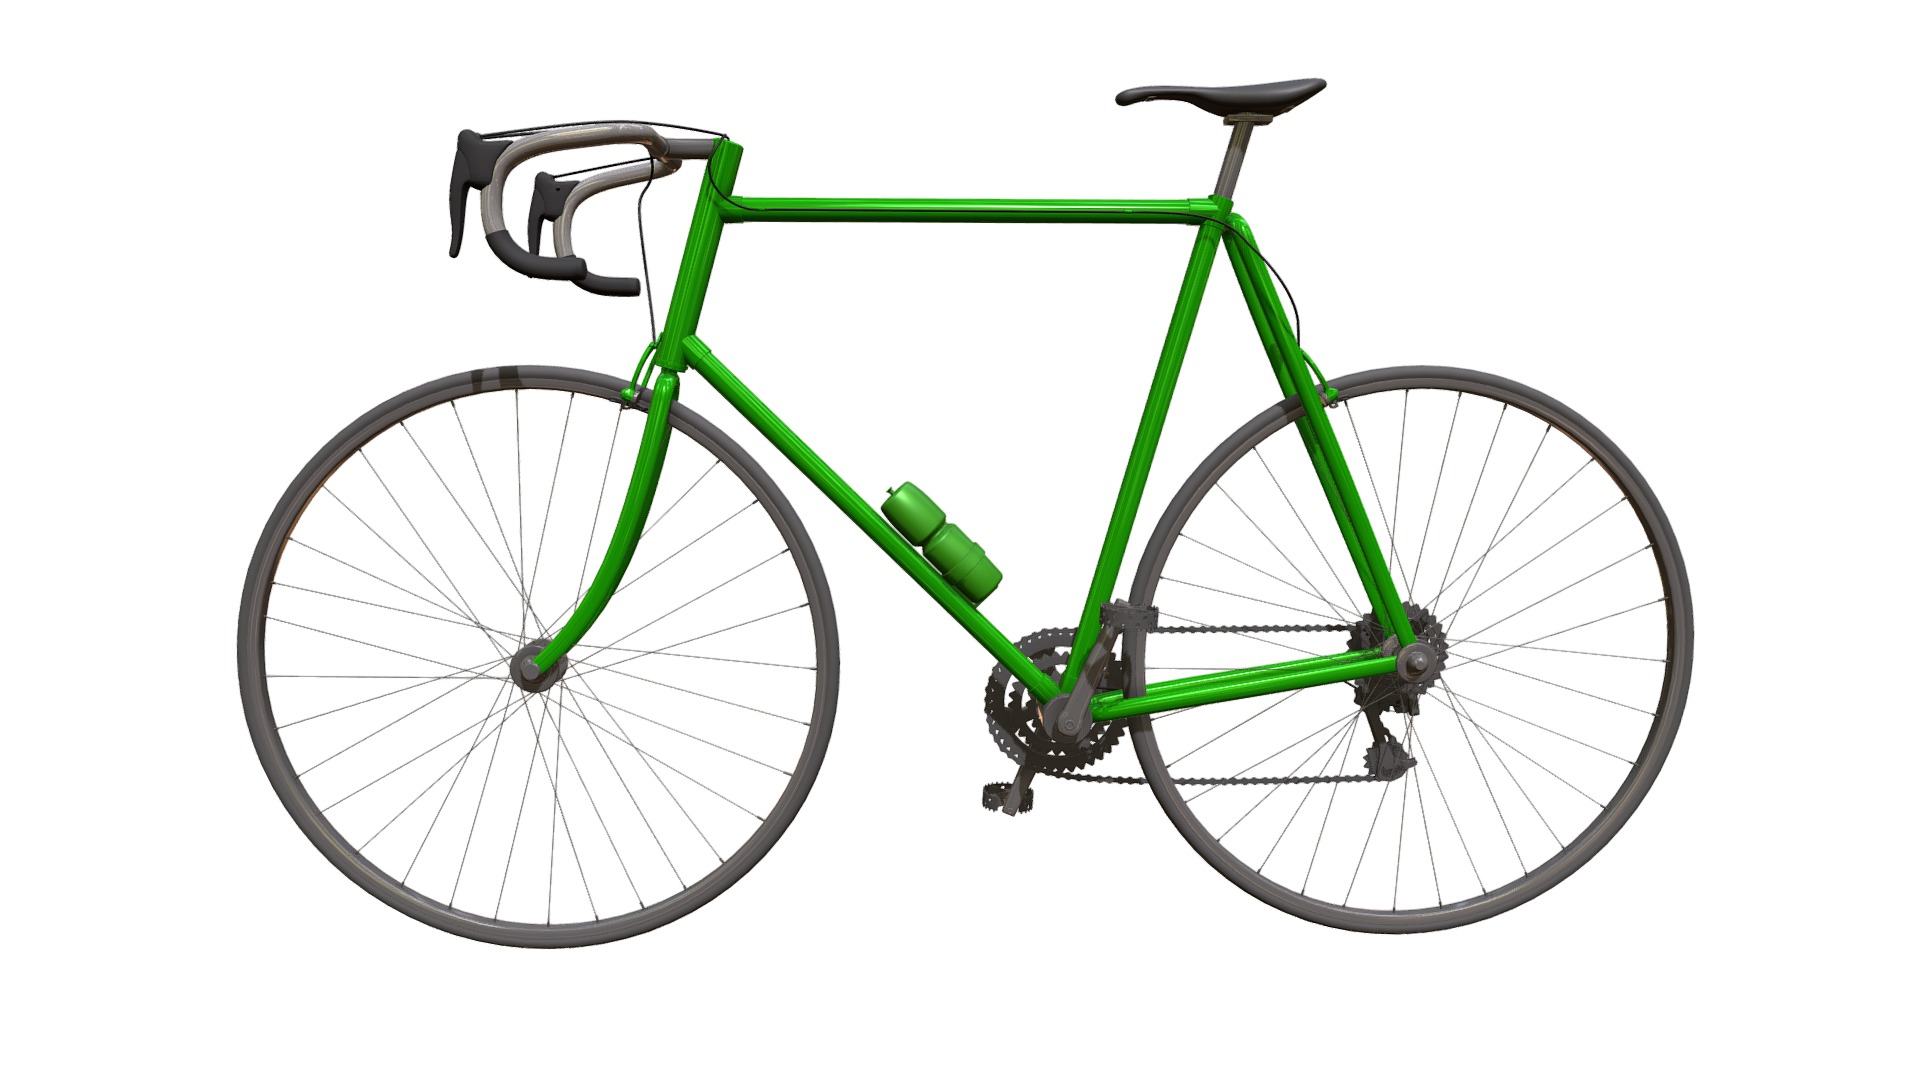 3D model Bike - This is a 3D model of the Bike. The 3D model is about a green and white bicycle.